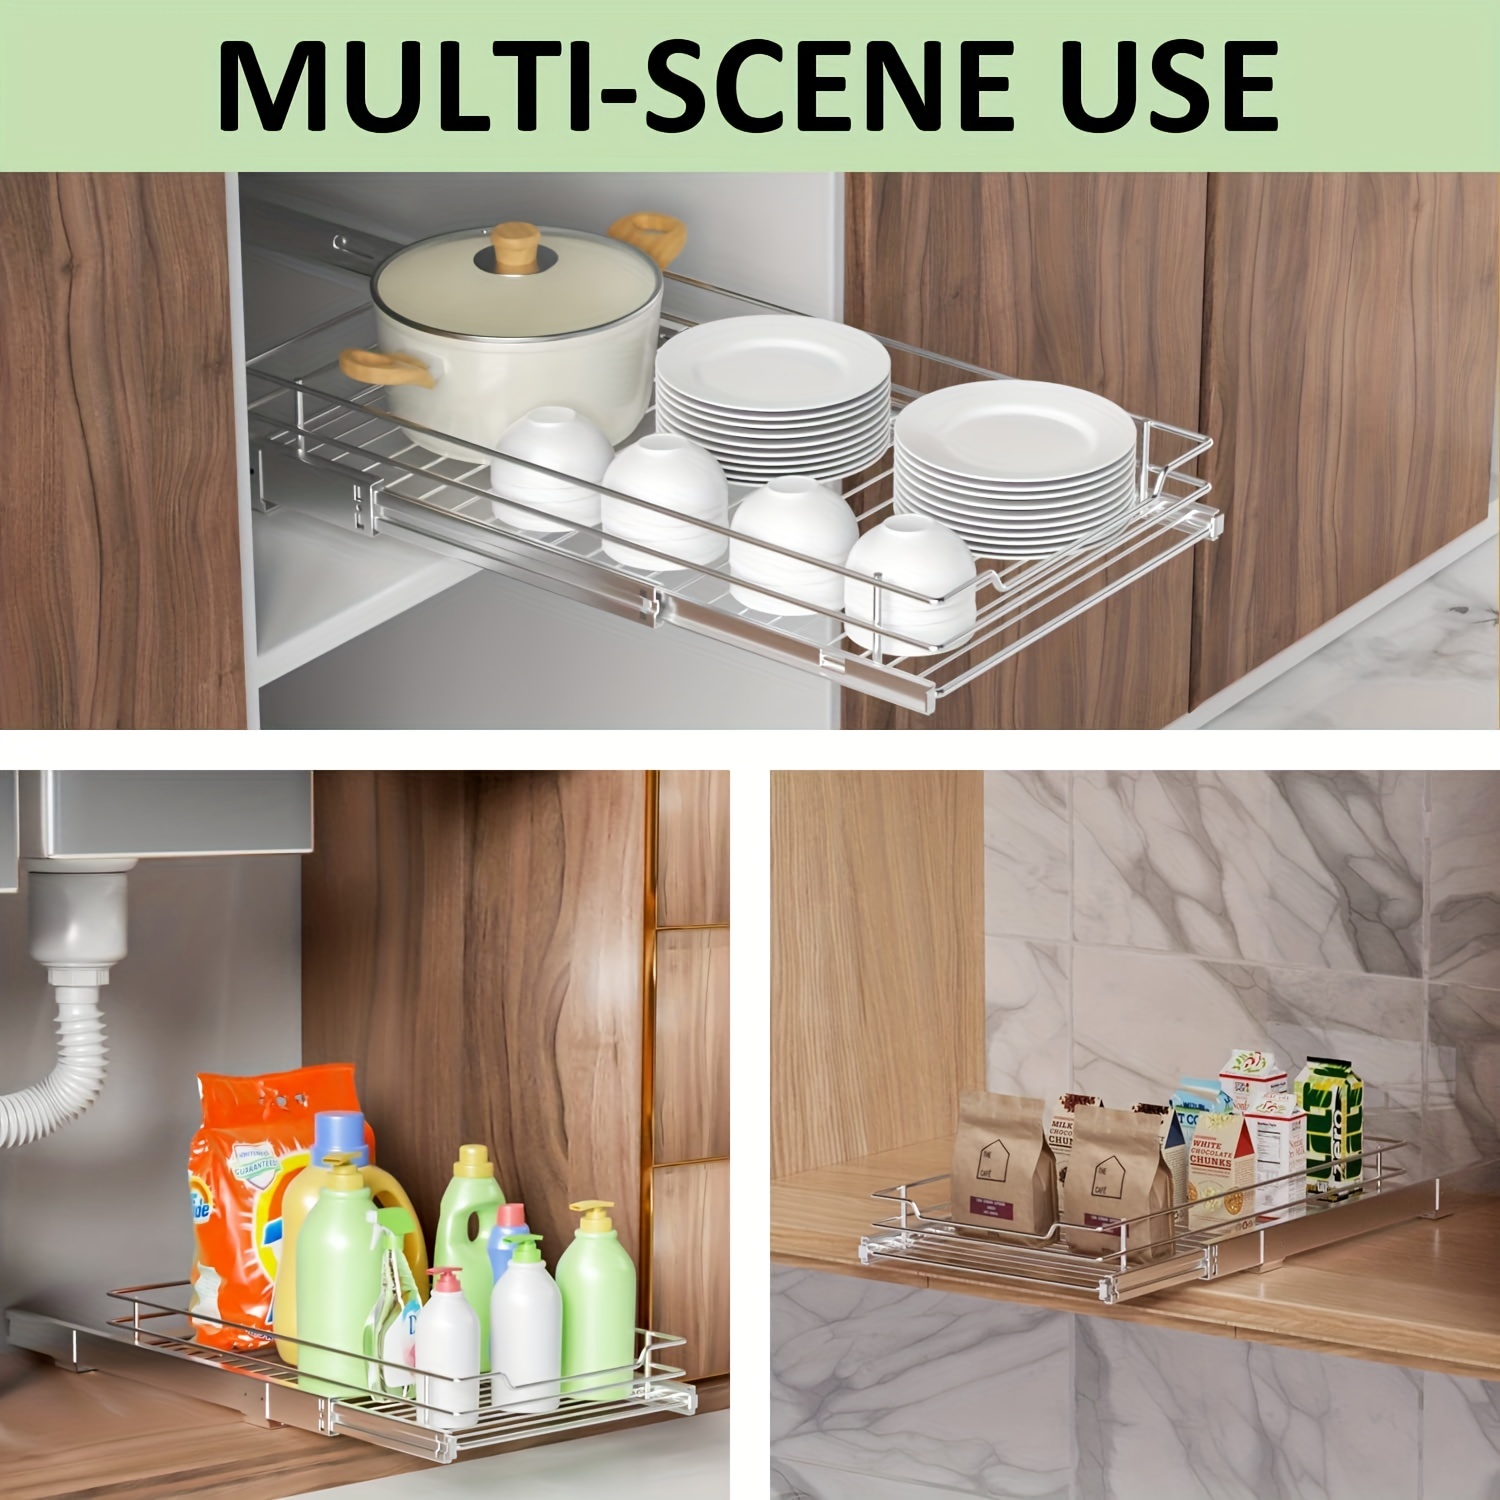 Pull Out Cabinet Organizer Fixed With Nano Adhesive, Medium